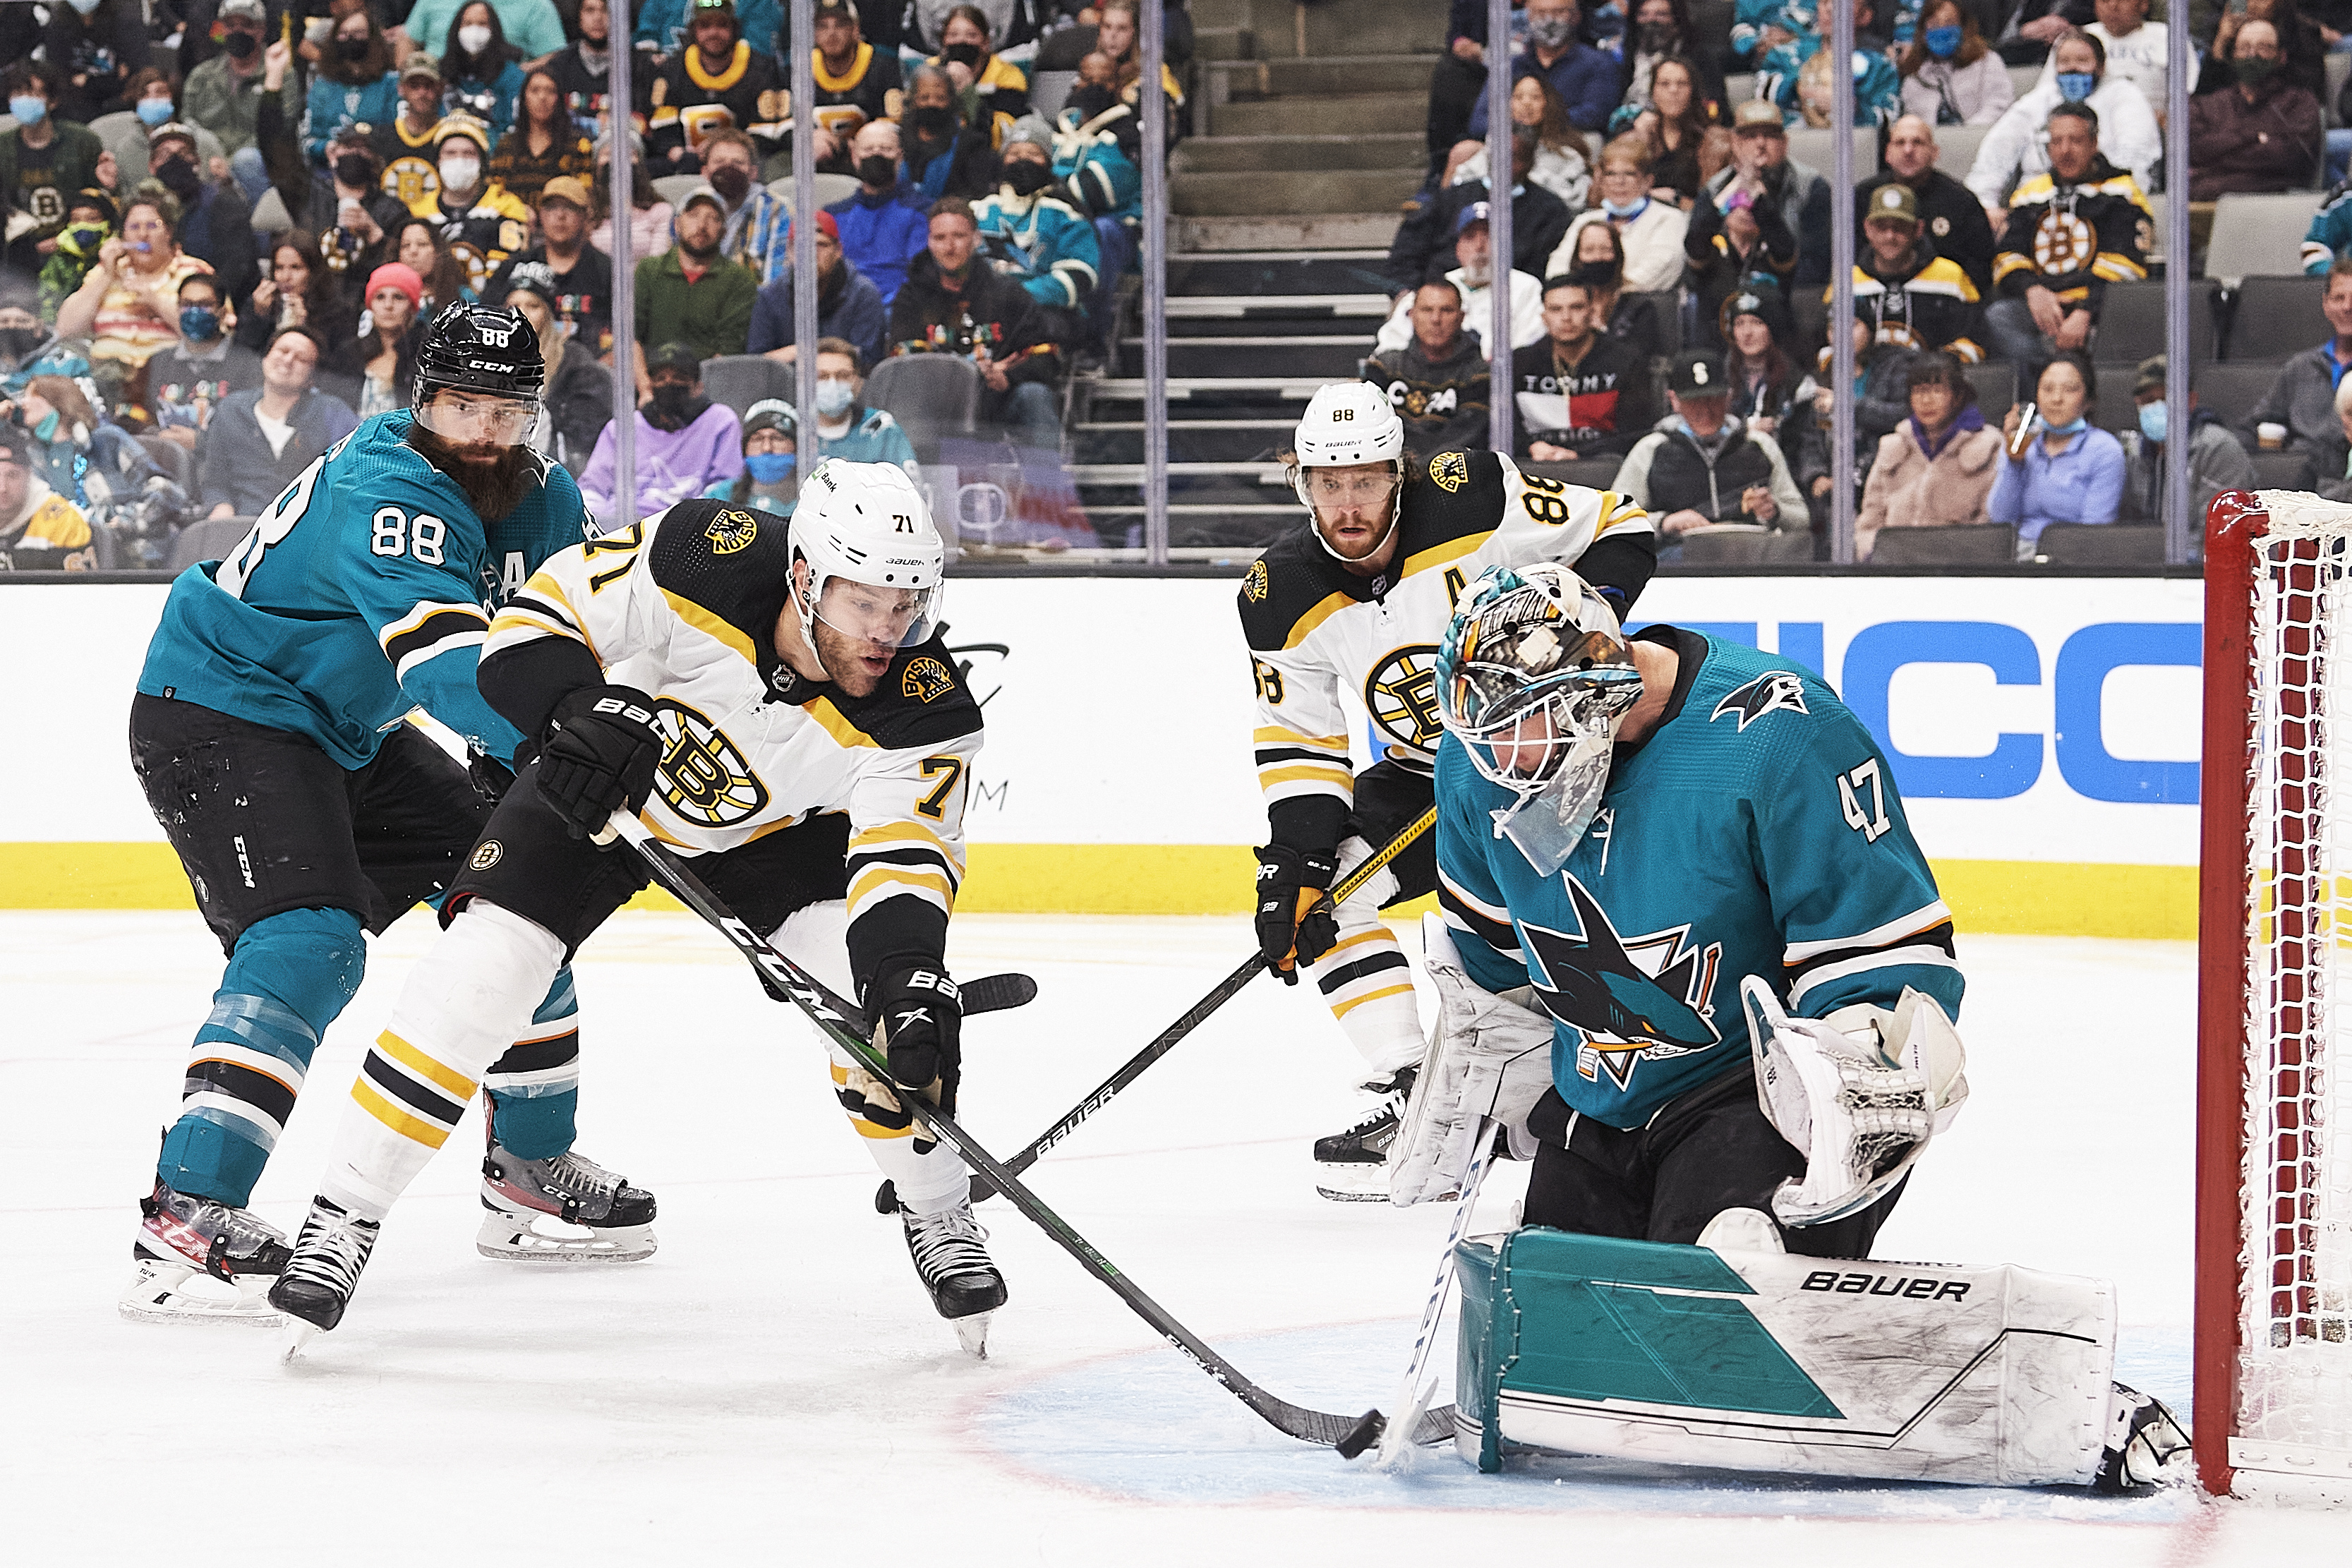 San Jose Sharks goaltender James Reimer (47) makes a save on Boston Bruins left wing Taylor Hall (71) during the NHL game between the San Jose Sharks and the Boston Bruins on February 26, 2022 at SAP Center in San Jose, CA.